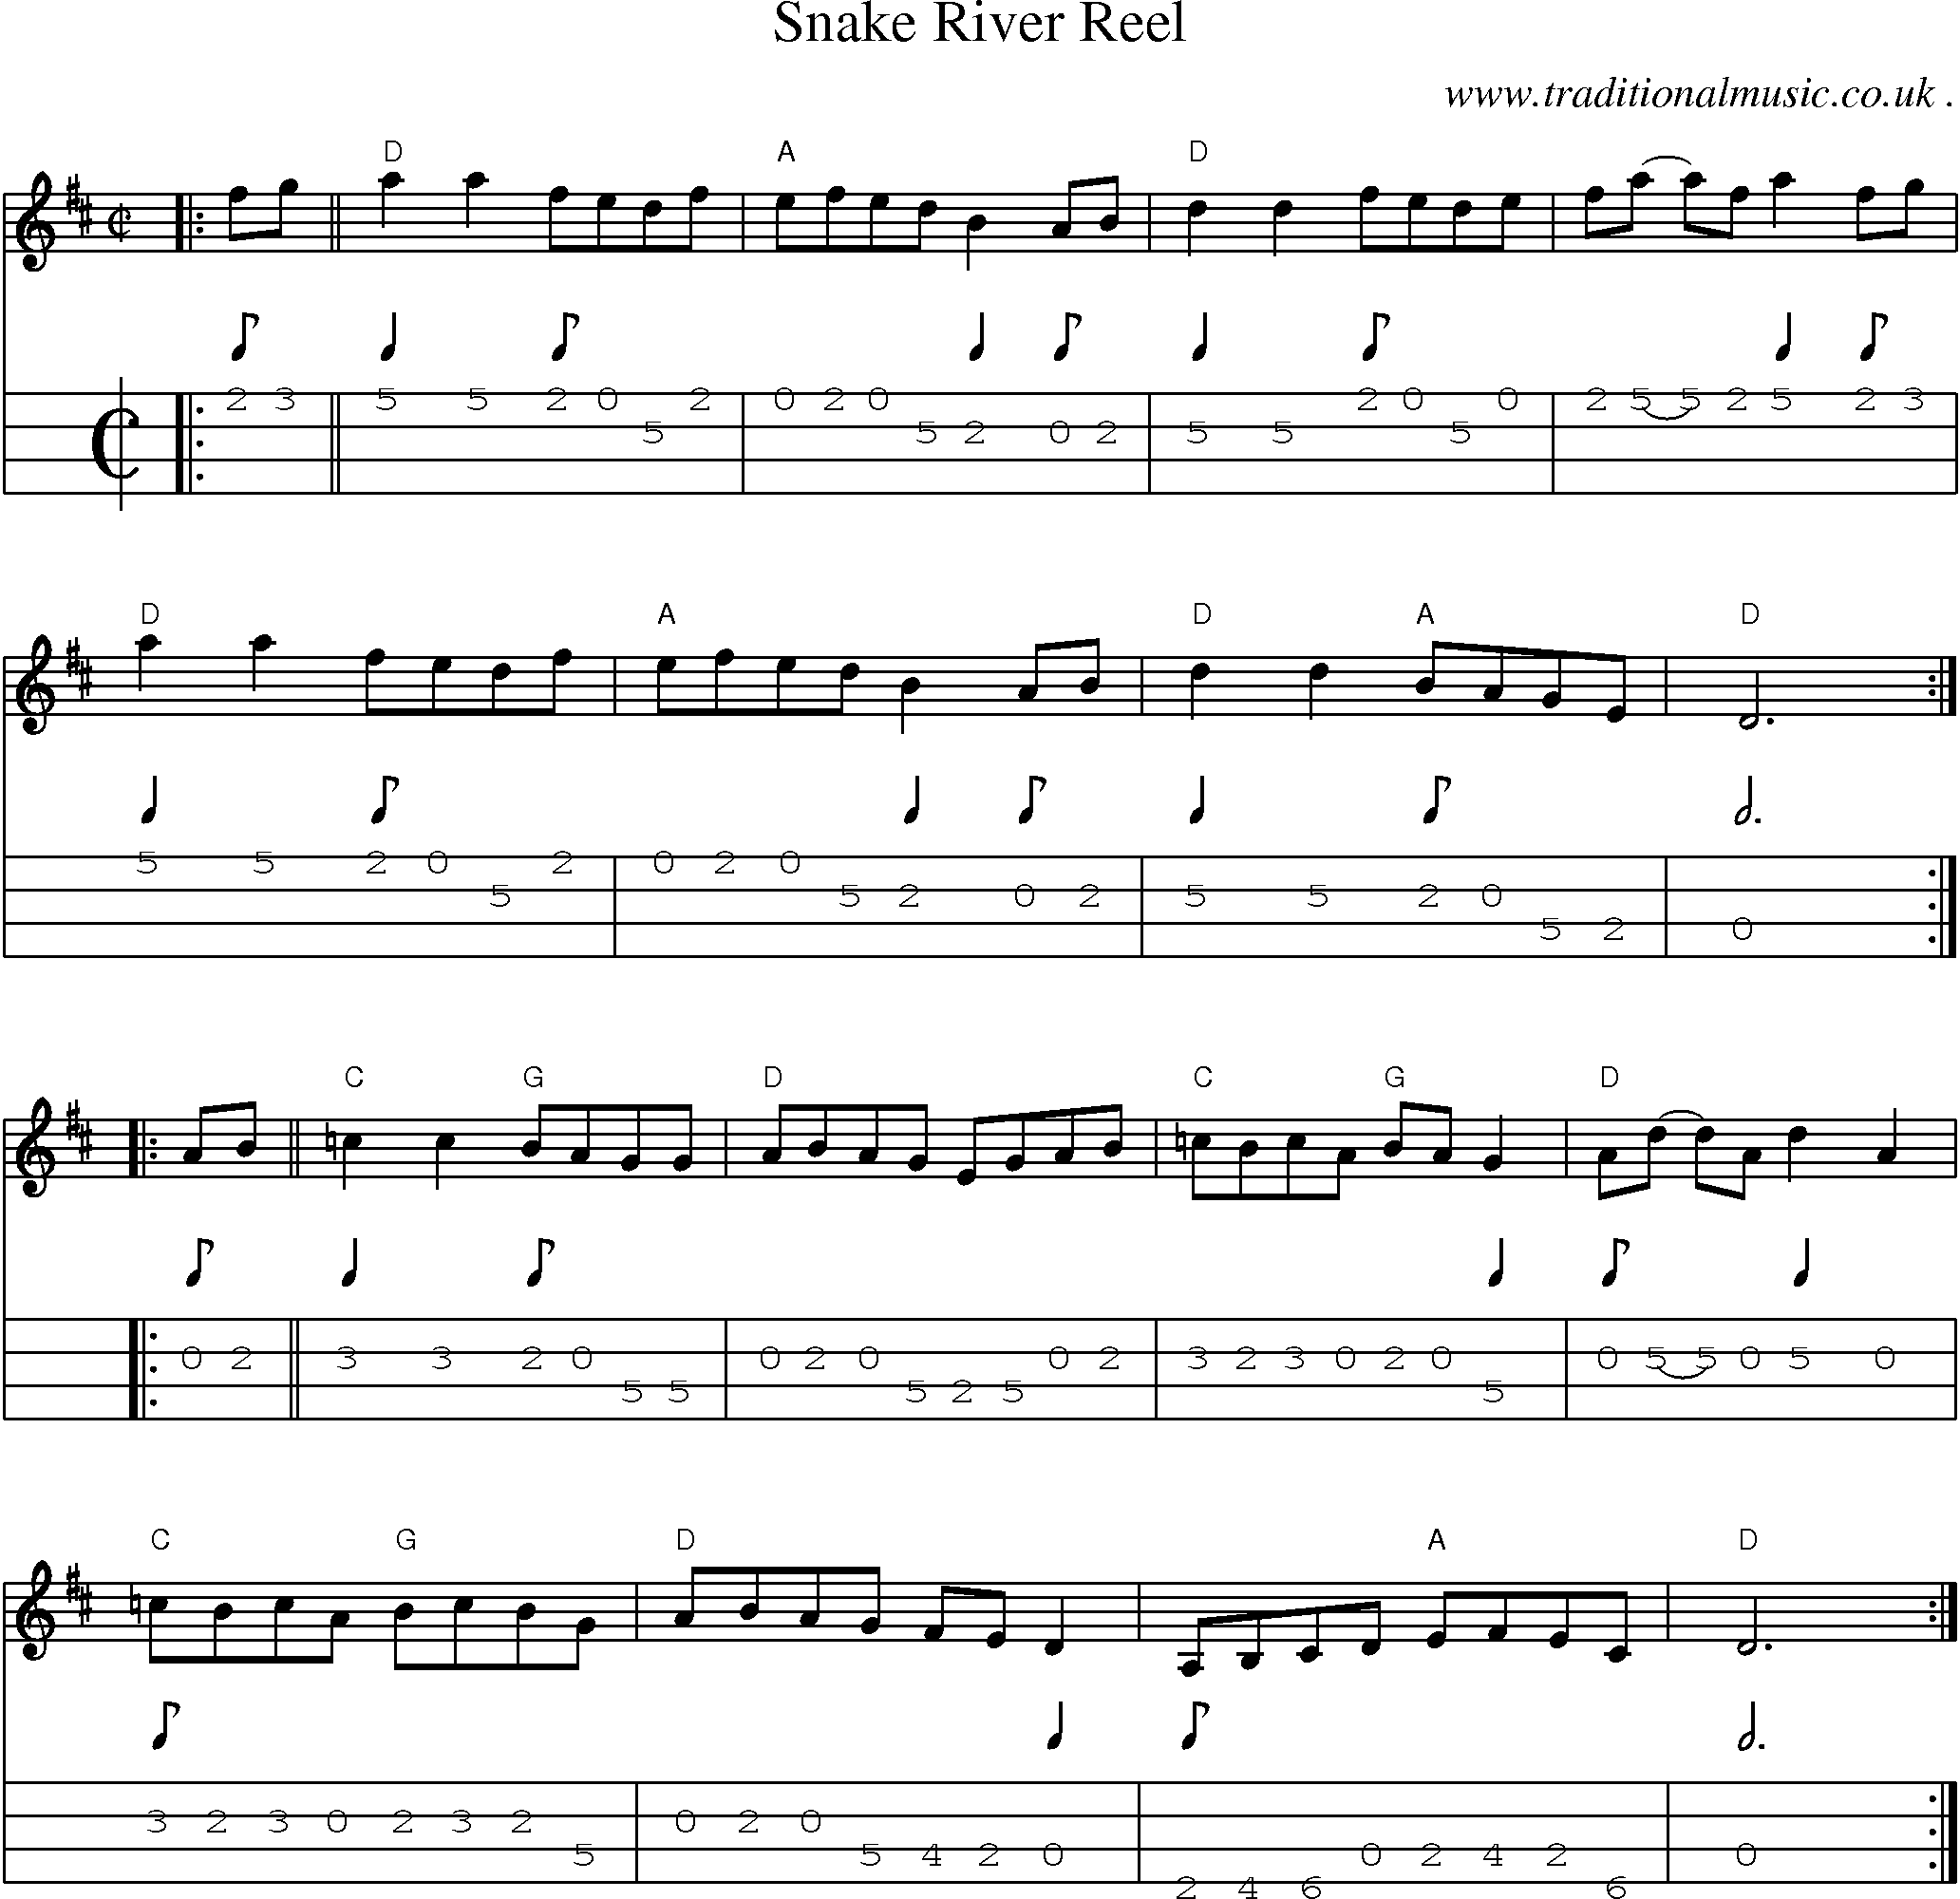 Music Score and Guitar Tabs for Snake River Reel